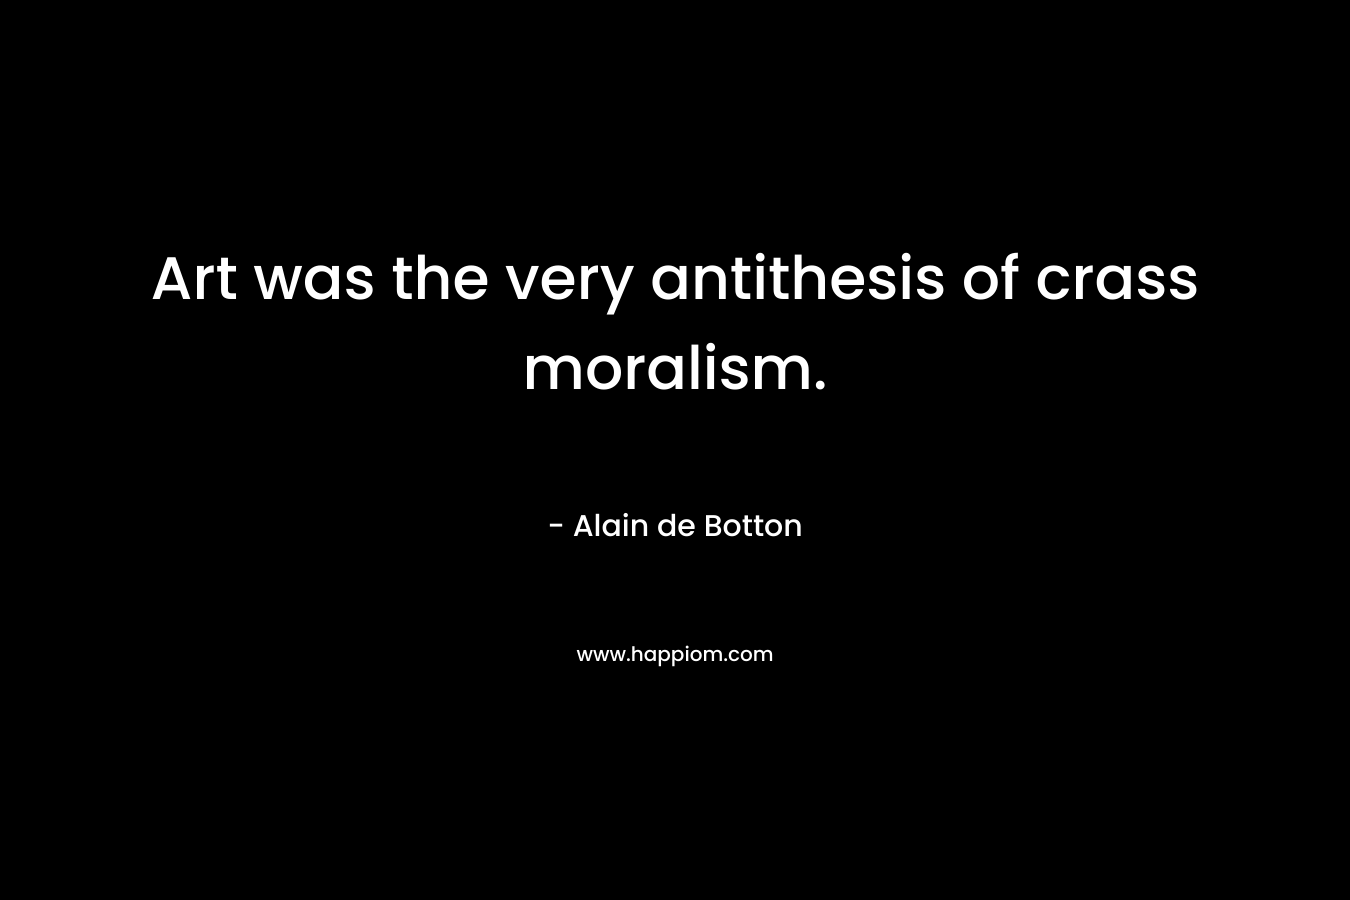 Art was the very antithesis of crass moralism.